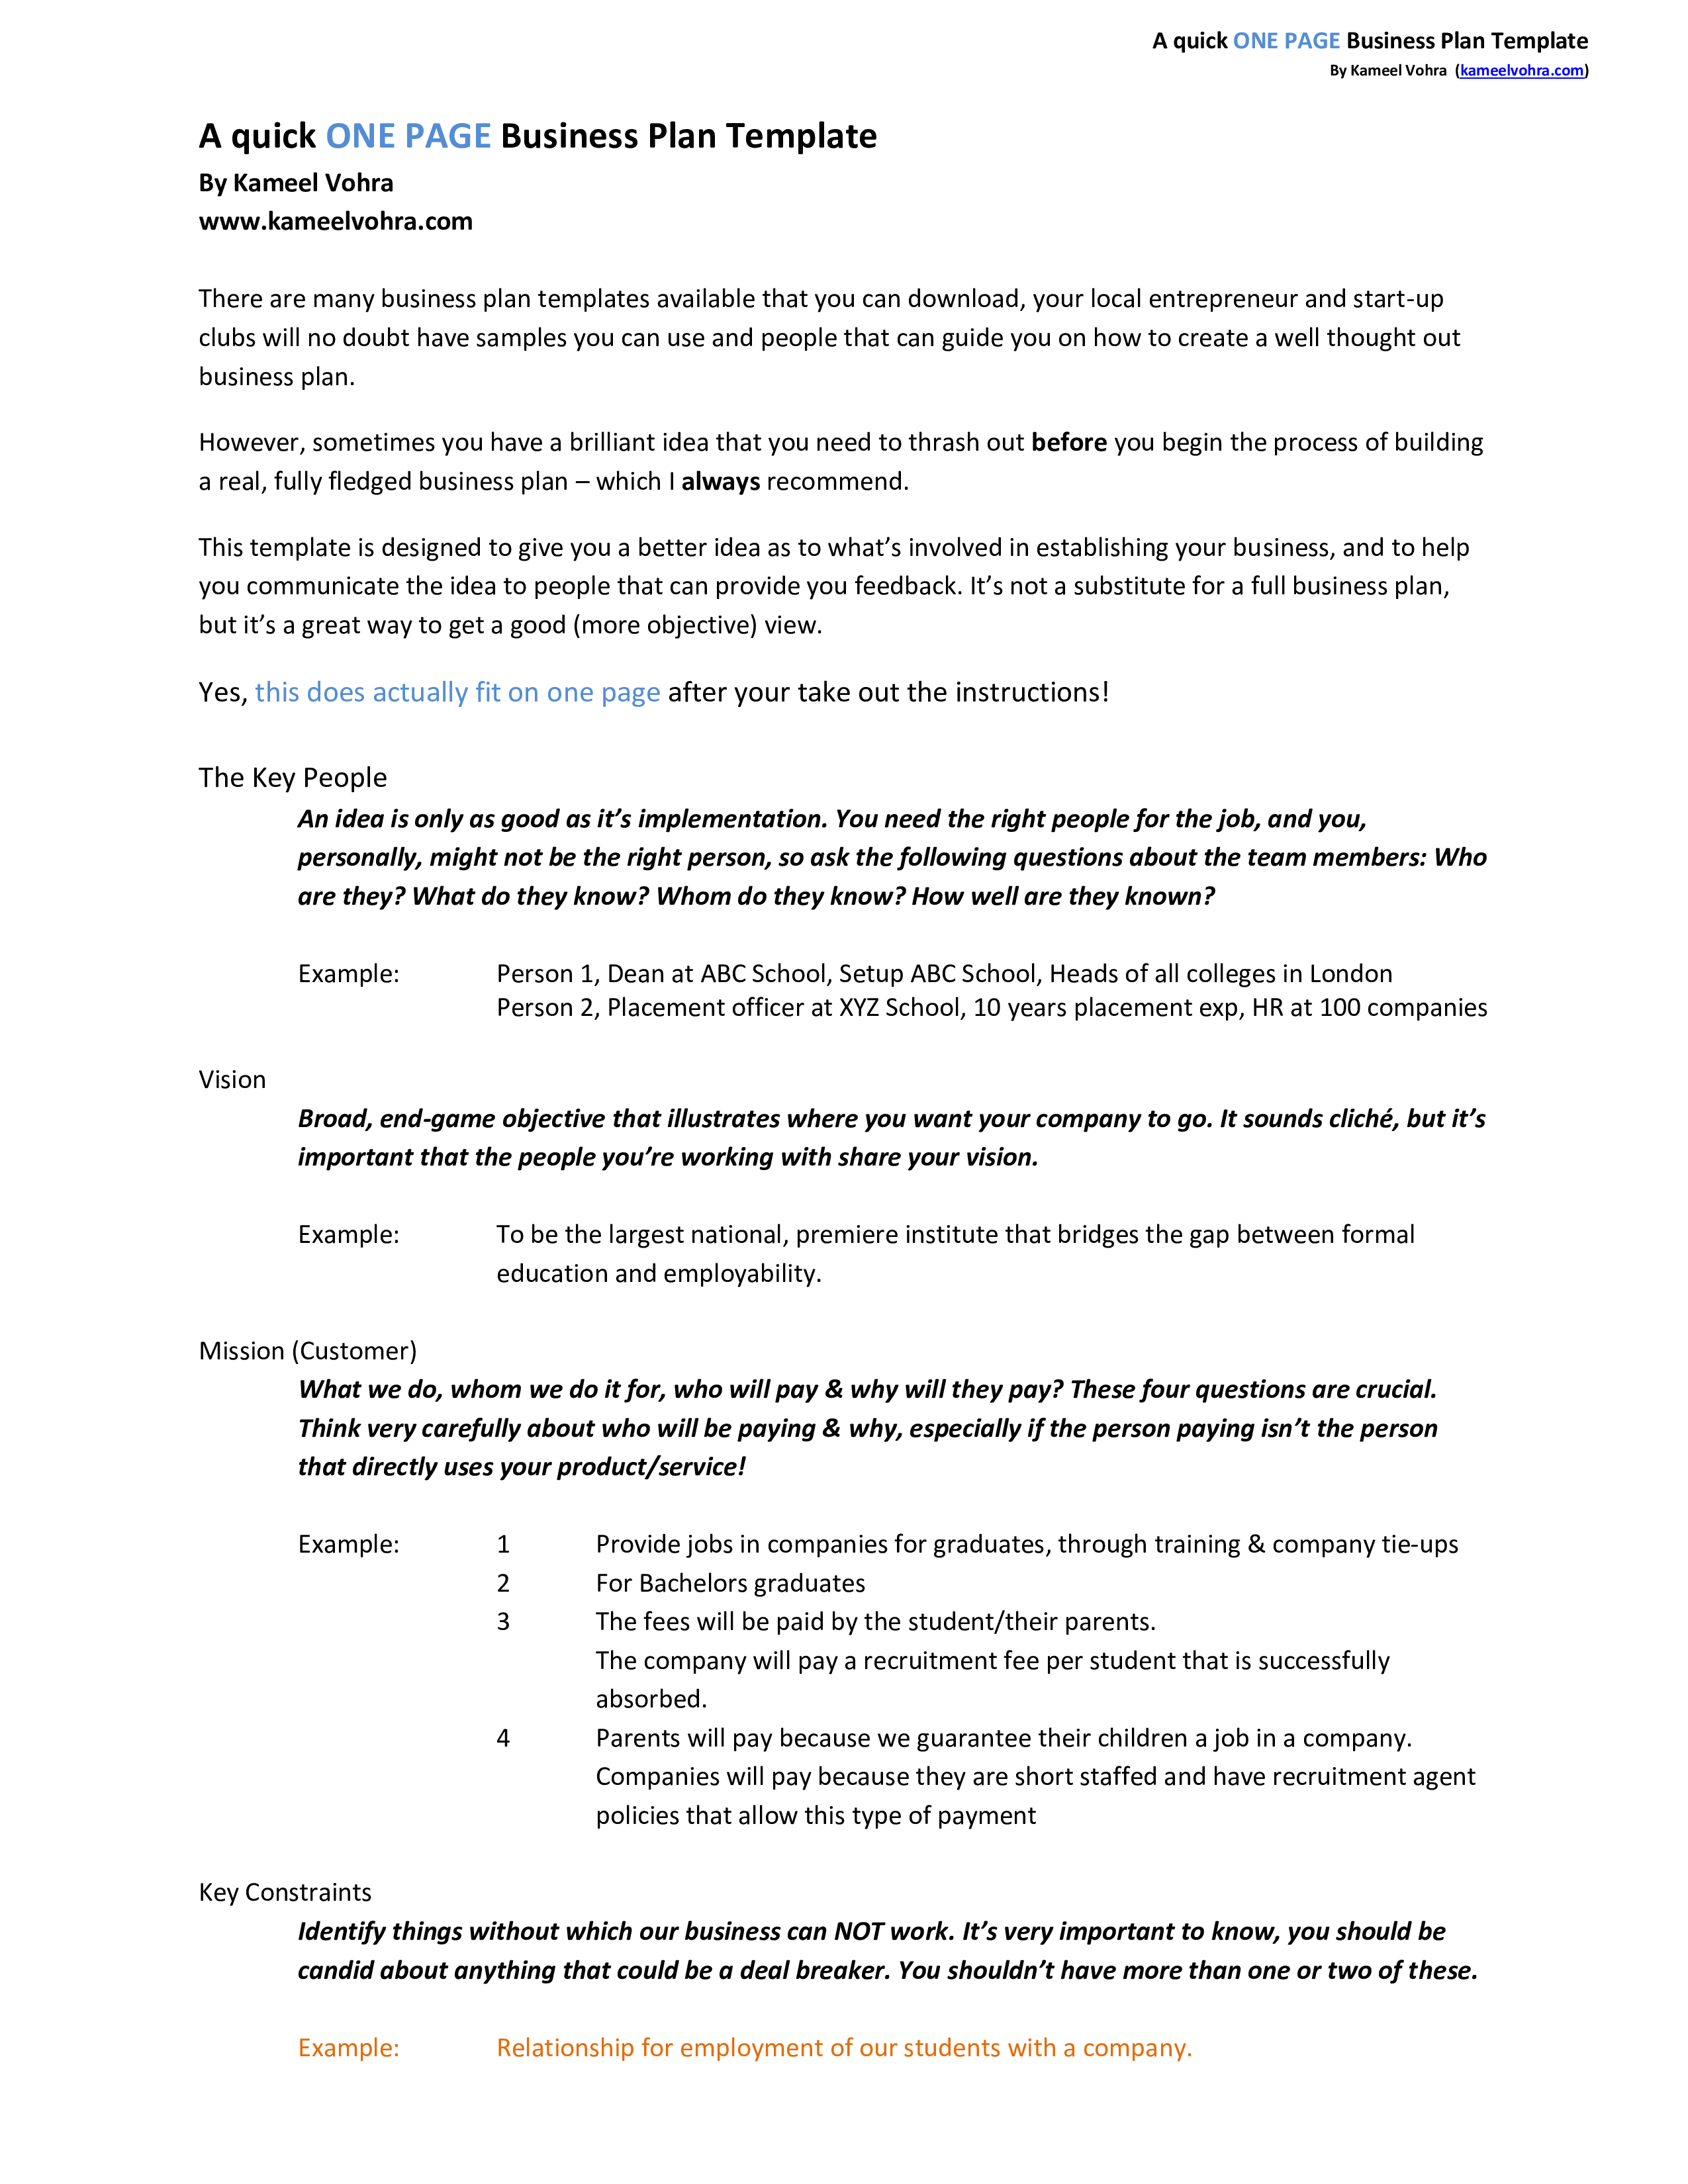 A Quick One Page Business Plan Template - Eloquens With Regard To Interview Business Plan Template